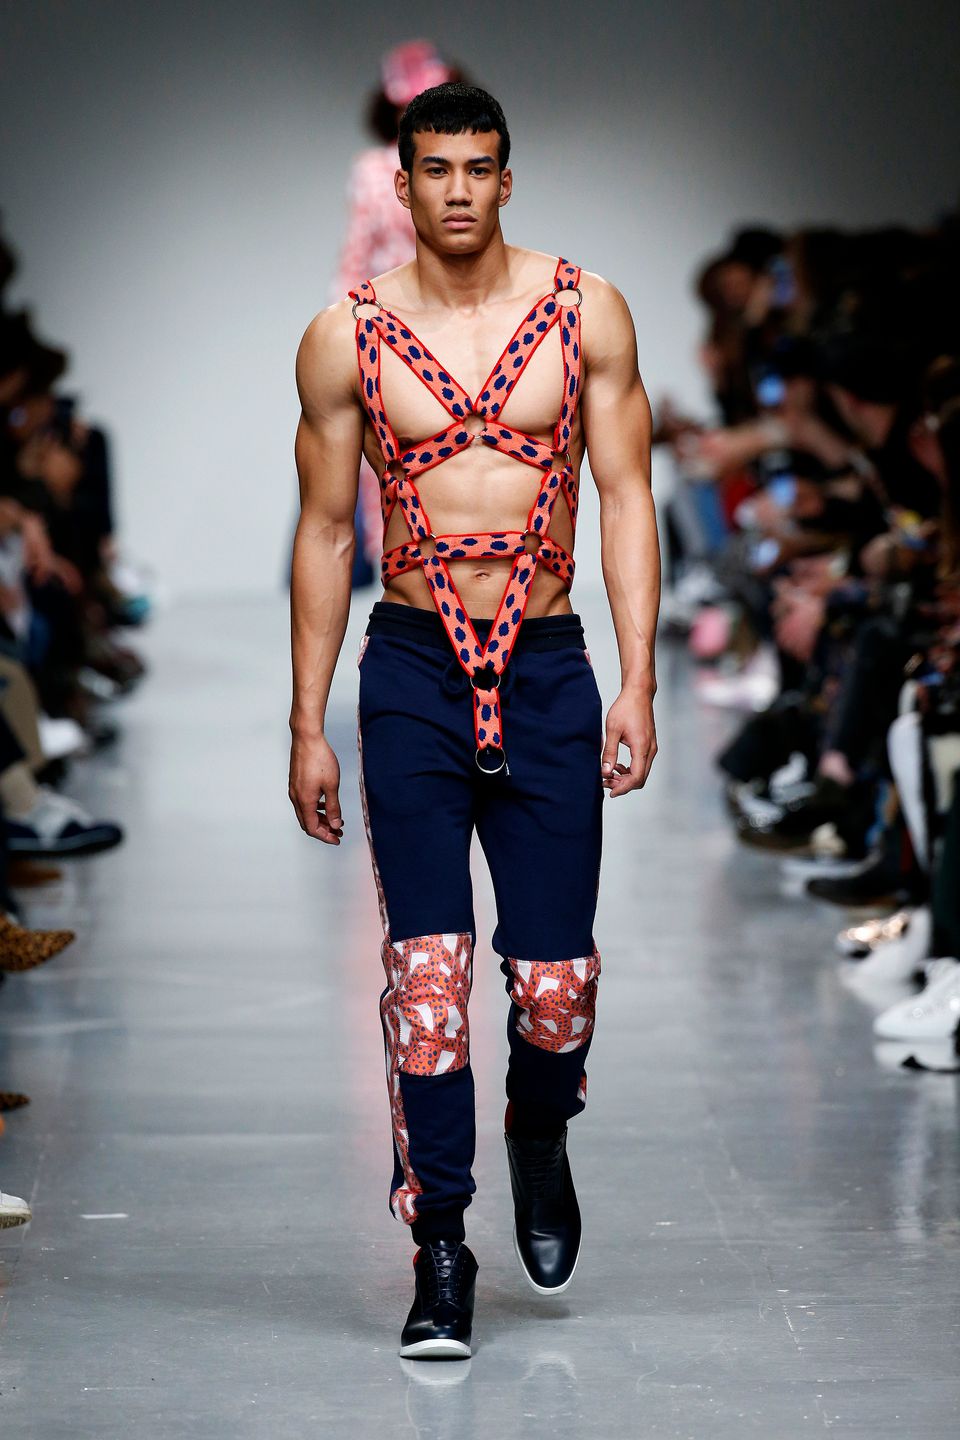 The 22 Most Outrageous Looks From London Men's Fashion Week